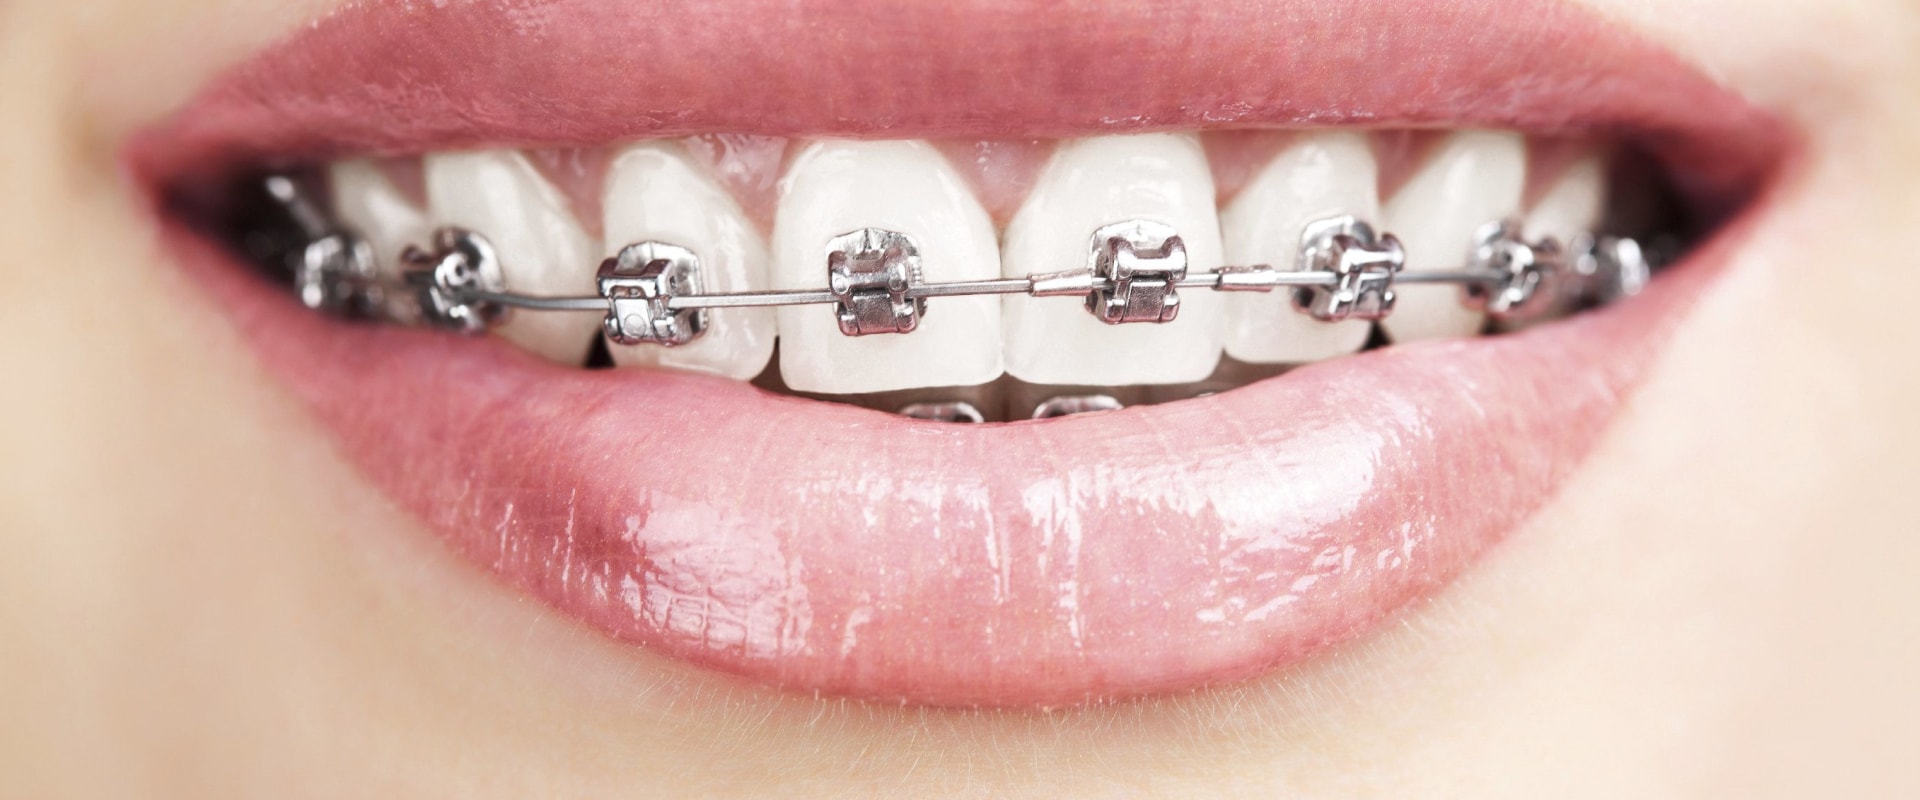 Caring for Your Teeth During Orthodontic Treatment: What You Need to Know